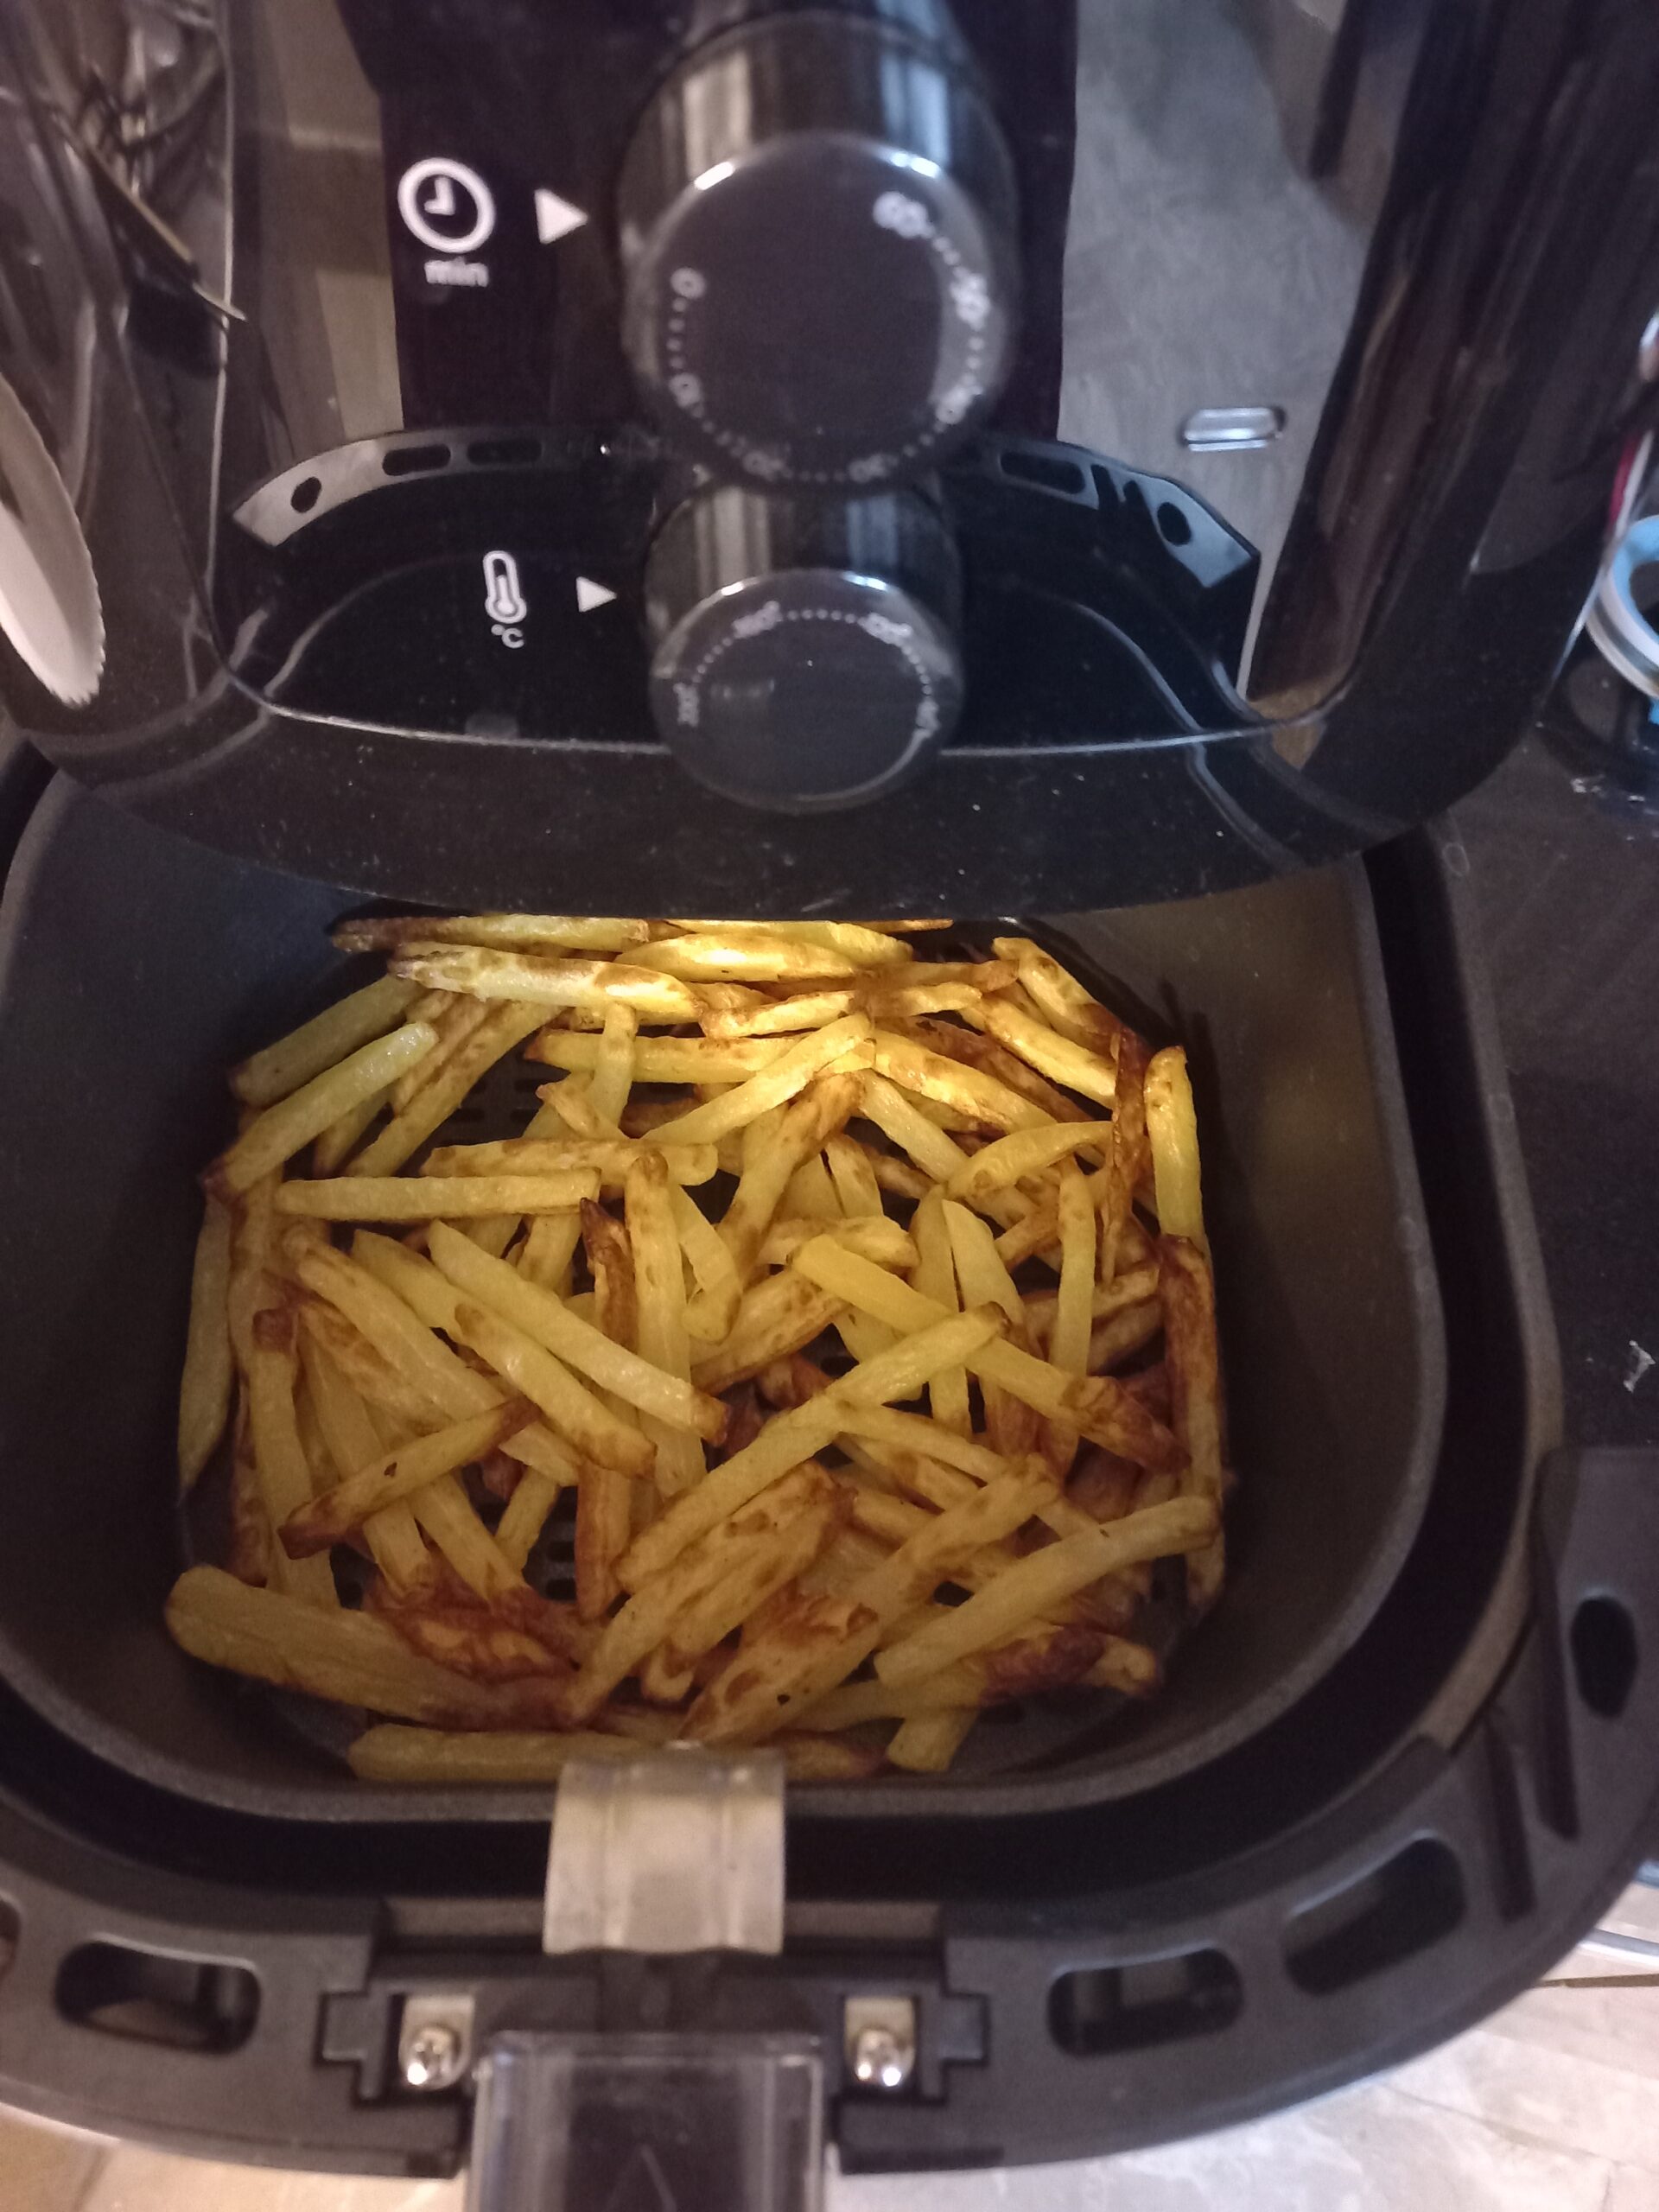 An image of french fries being cooked in an air fryer.